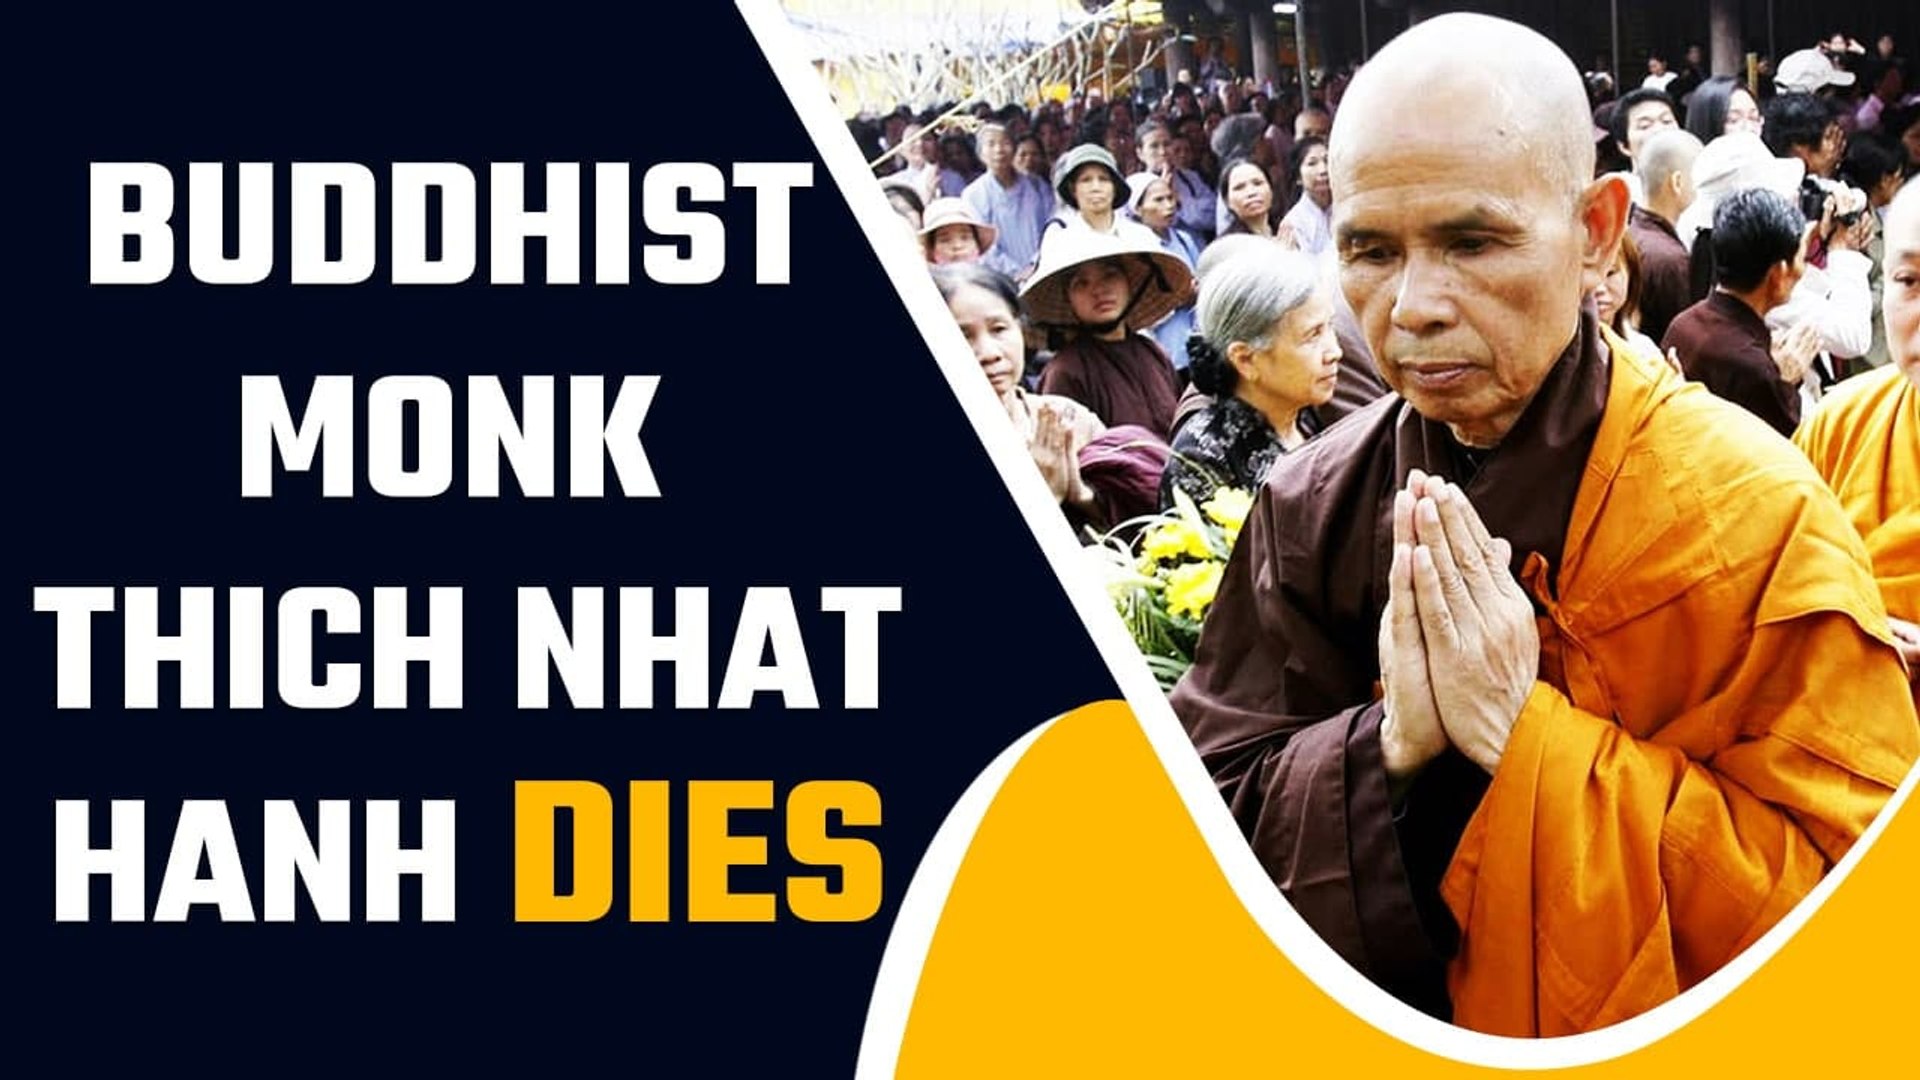 Thich Nhat Hanh dies aged 95, Buddhism loses 'Father of